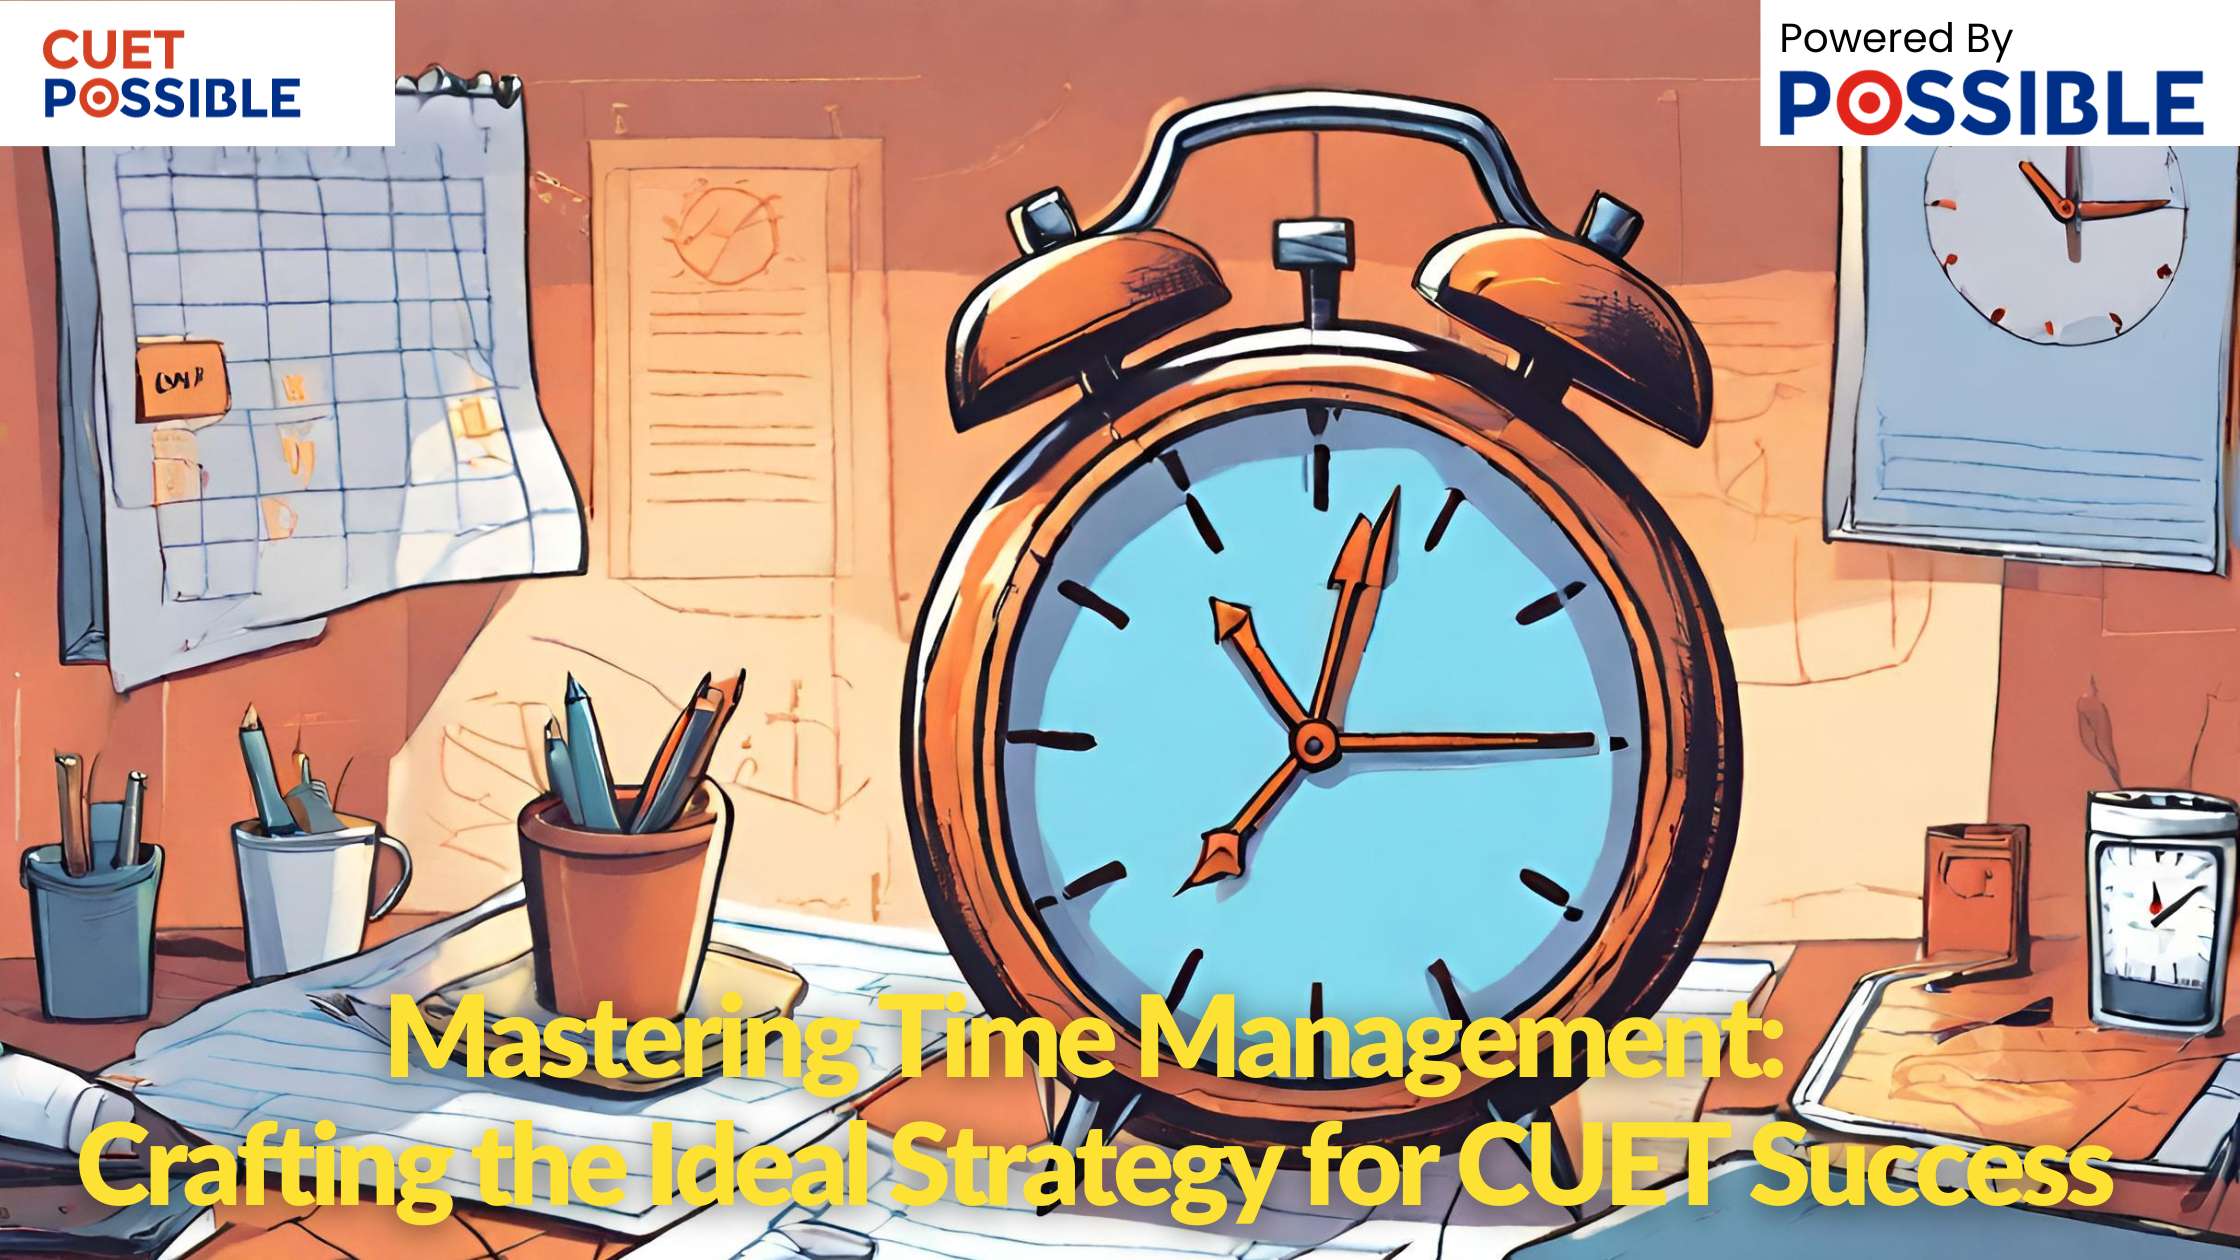 Strategy for CUET Success